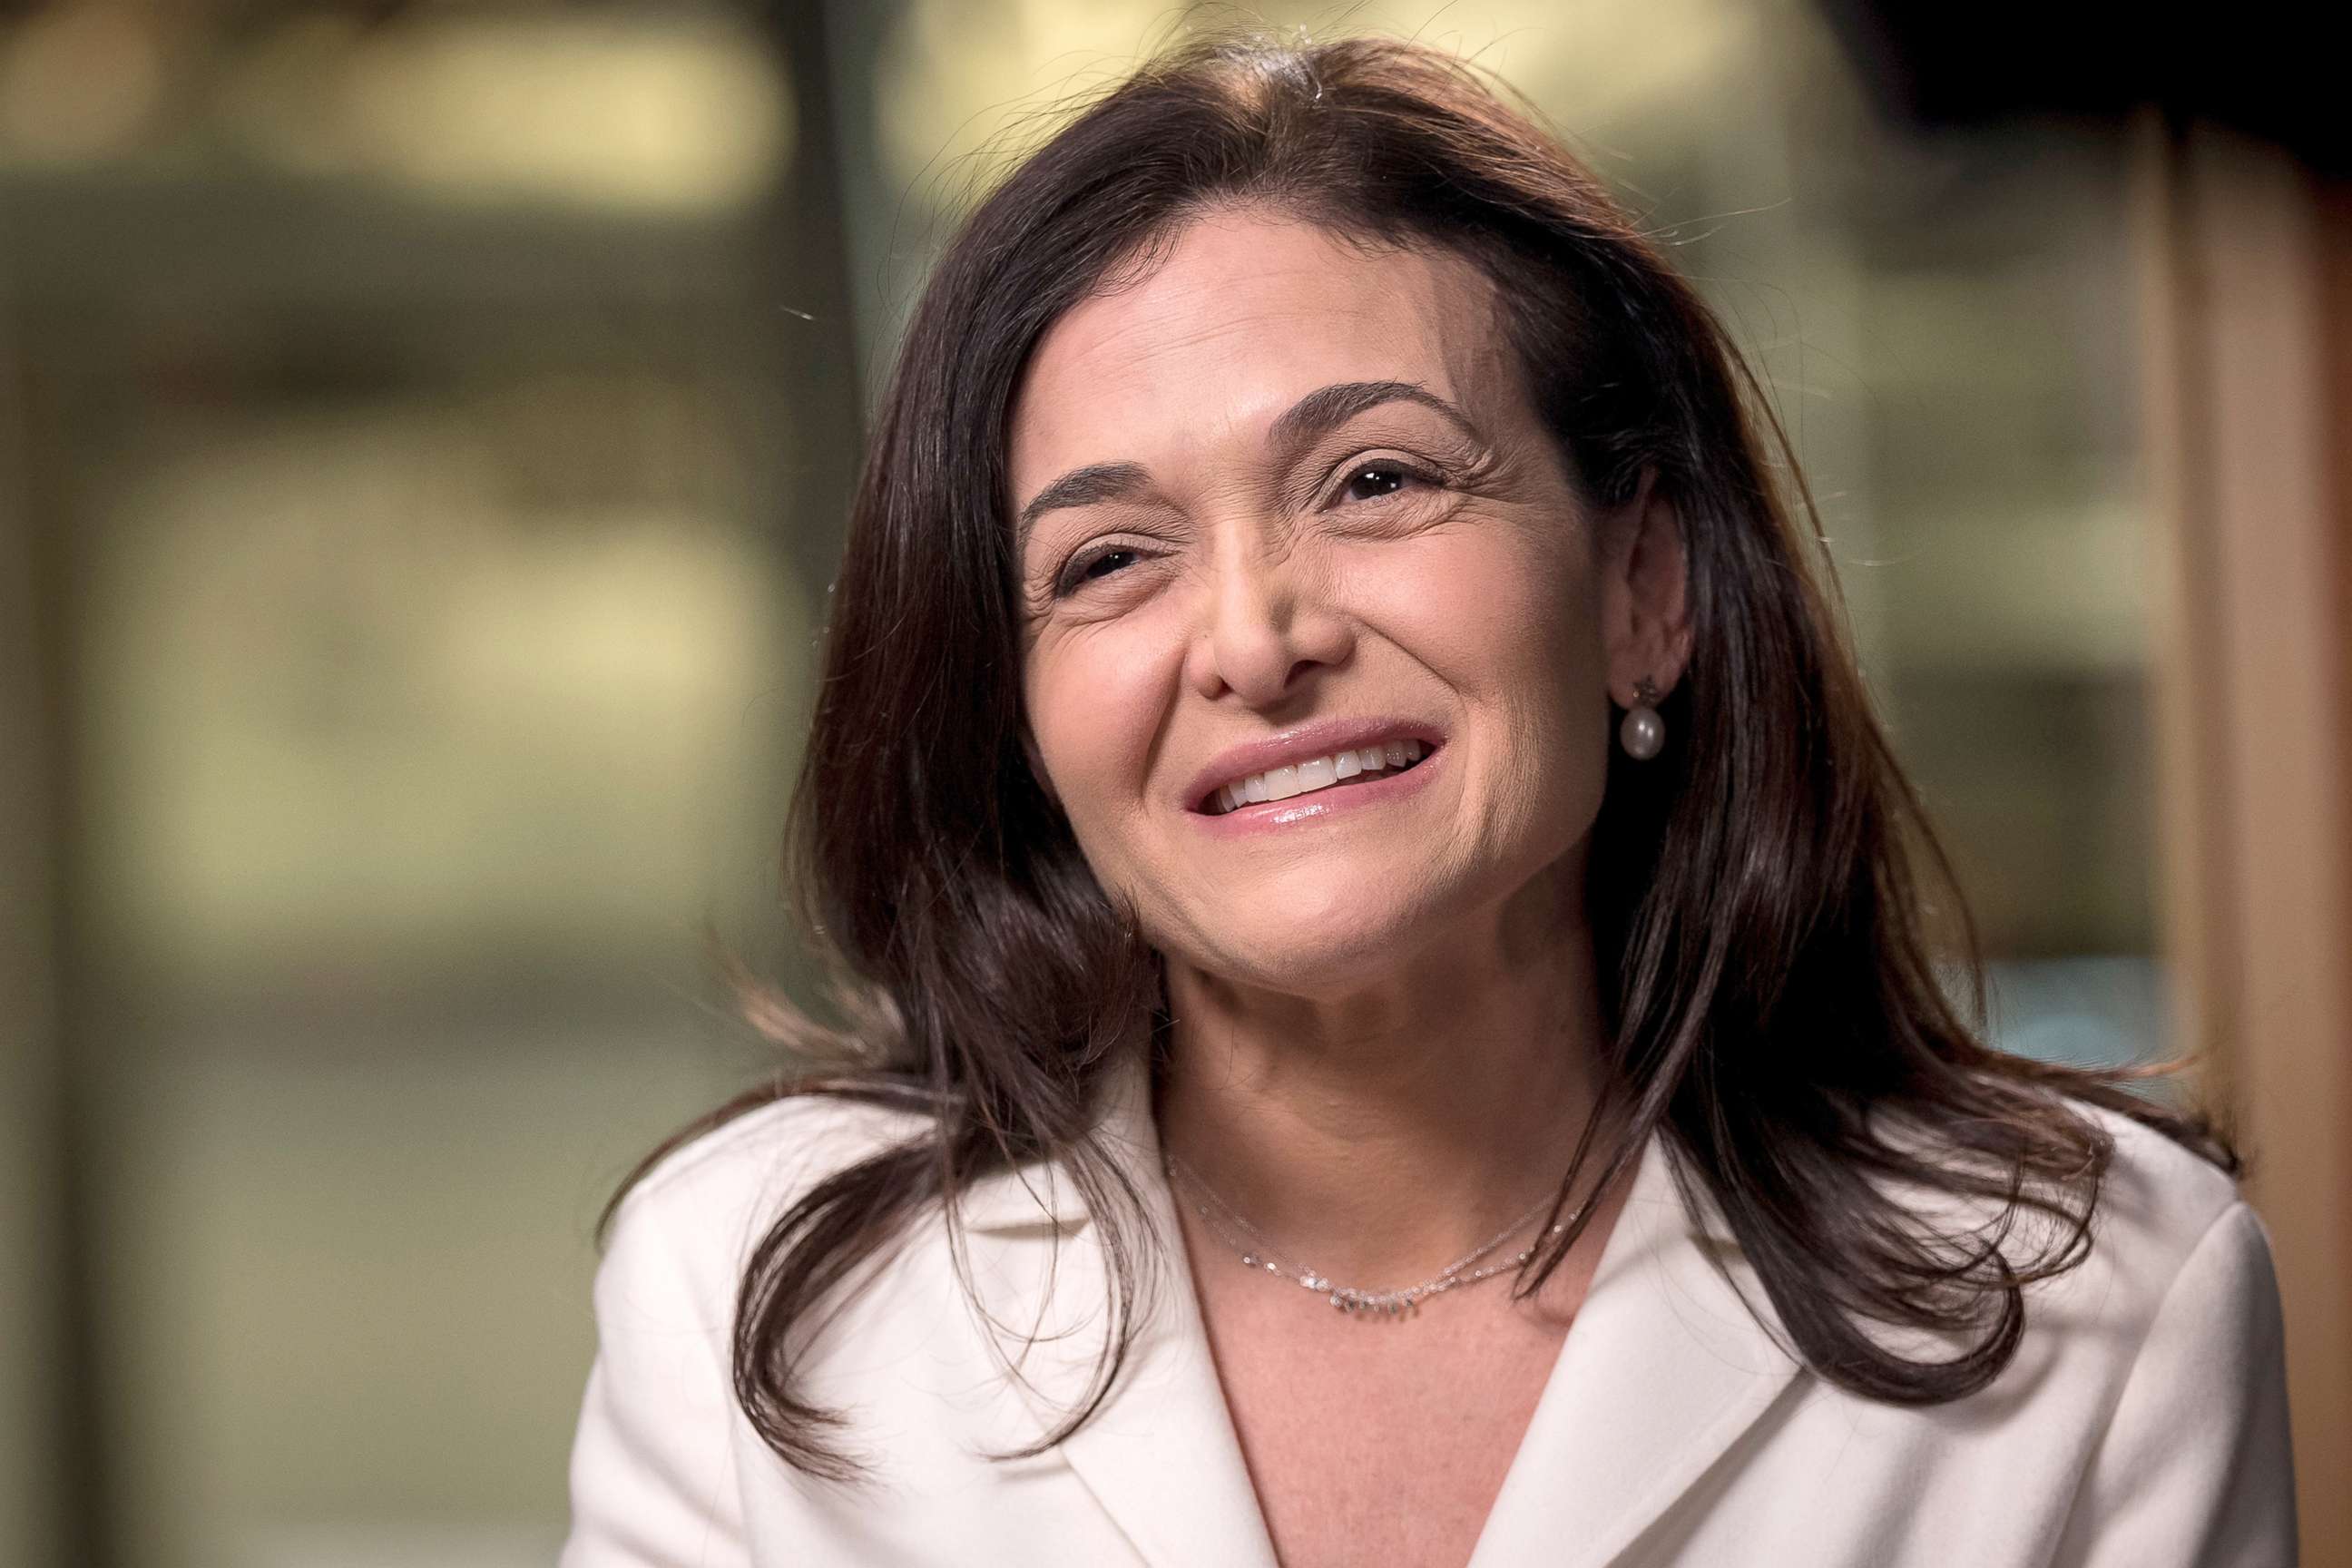 5 years after tragedy, Facebook's Sheryl Sandberg is engaged - ABC News